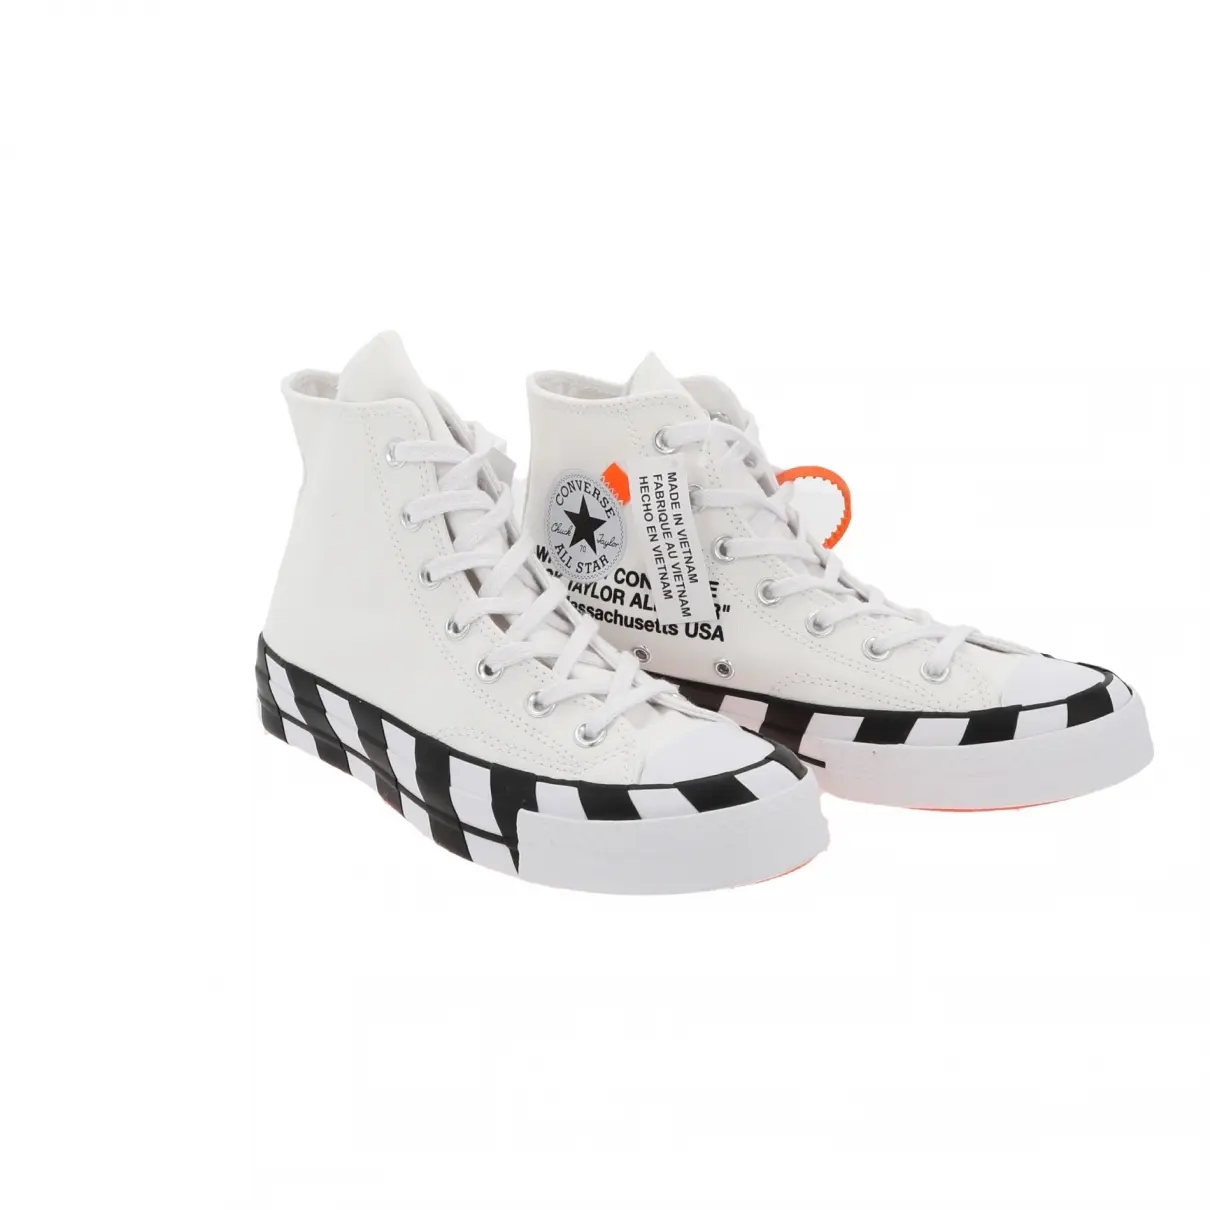 Converse x Off-White Cloth low trainers for sale